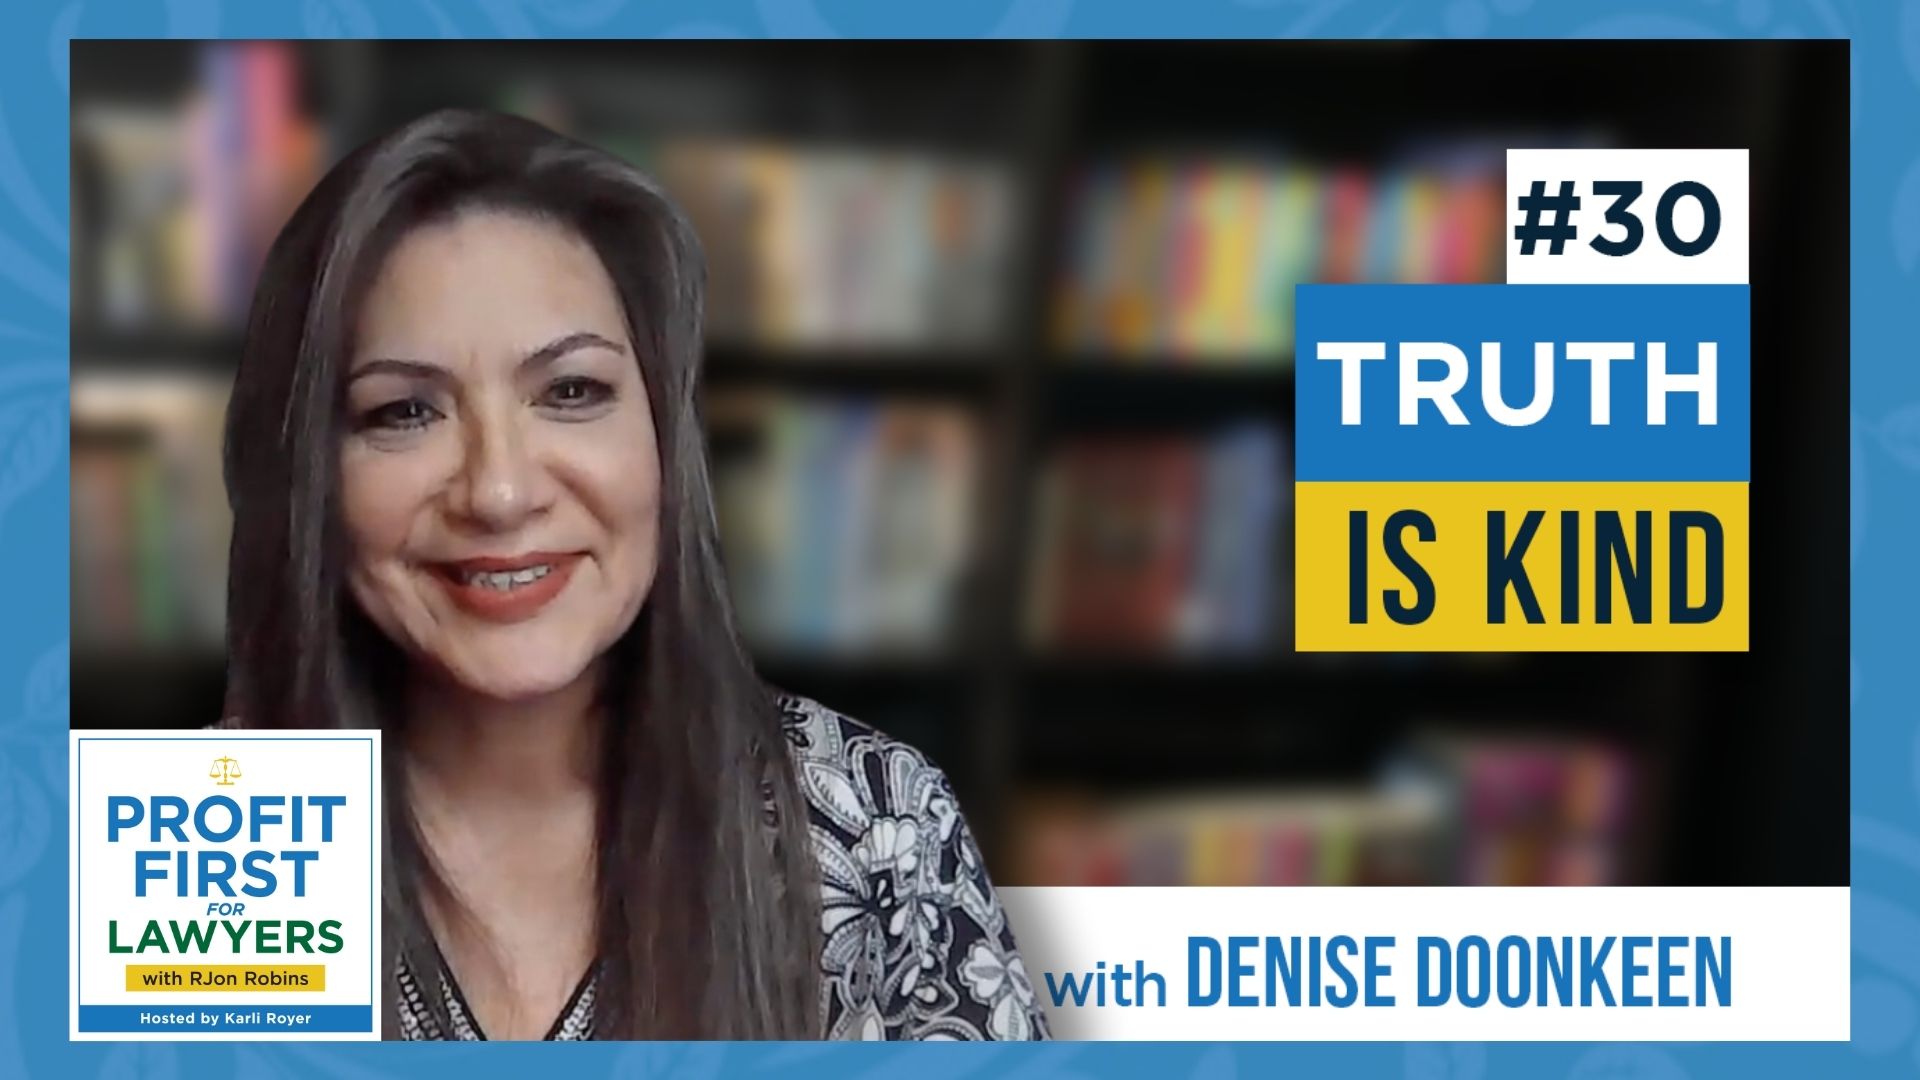 Denise Doonkeen featured image for episode 30 titled, "Truth is Kind"